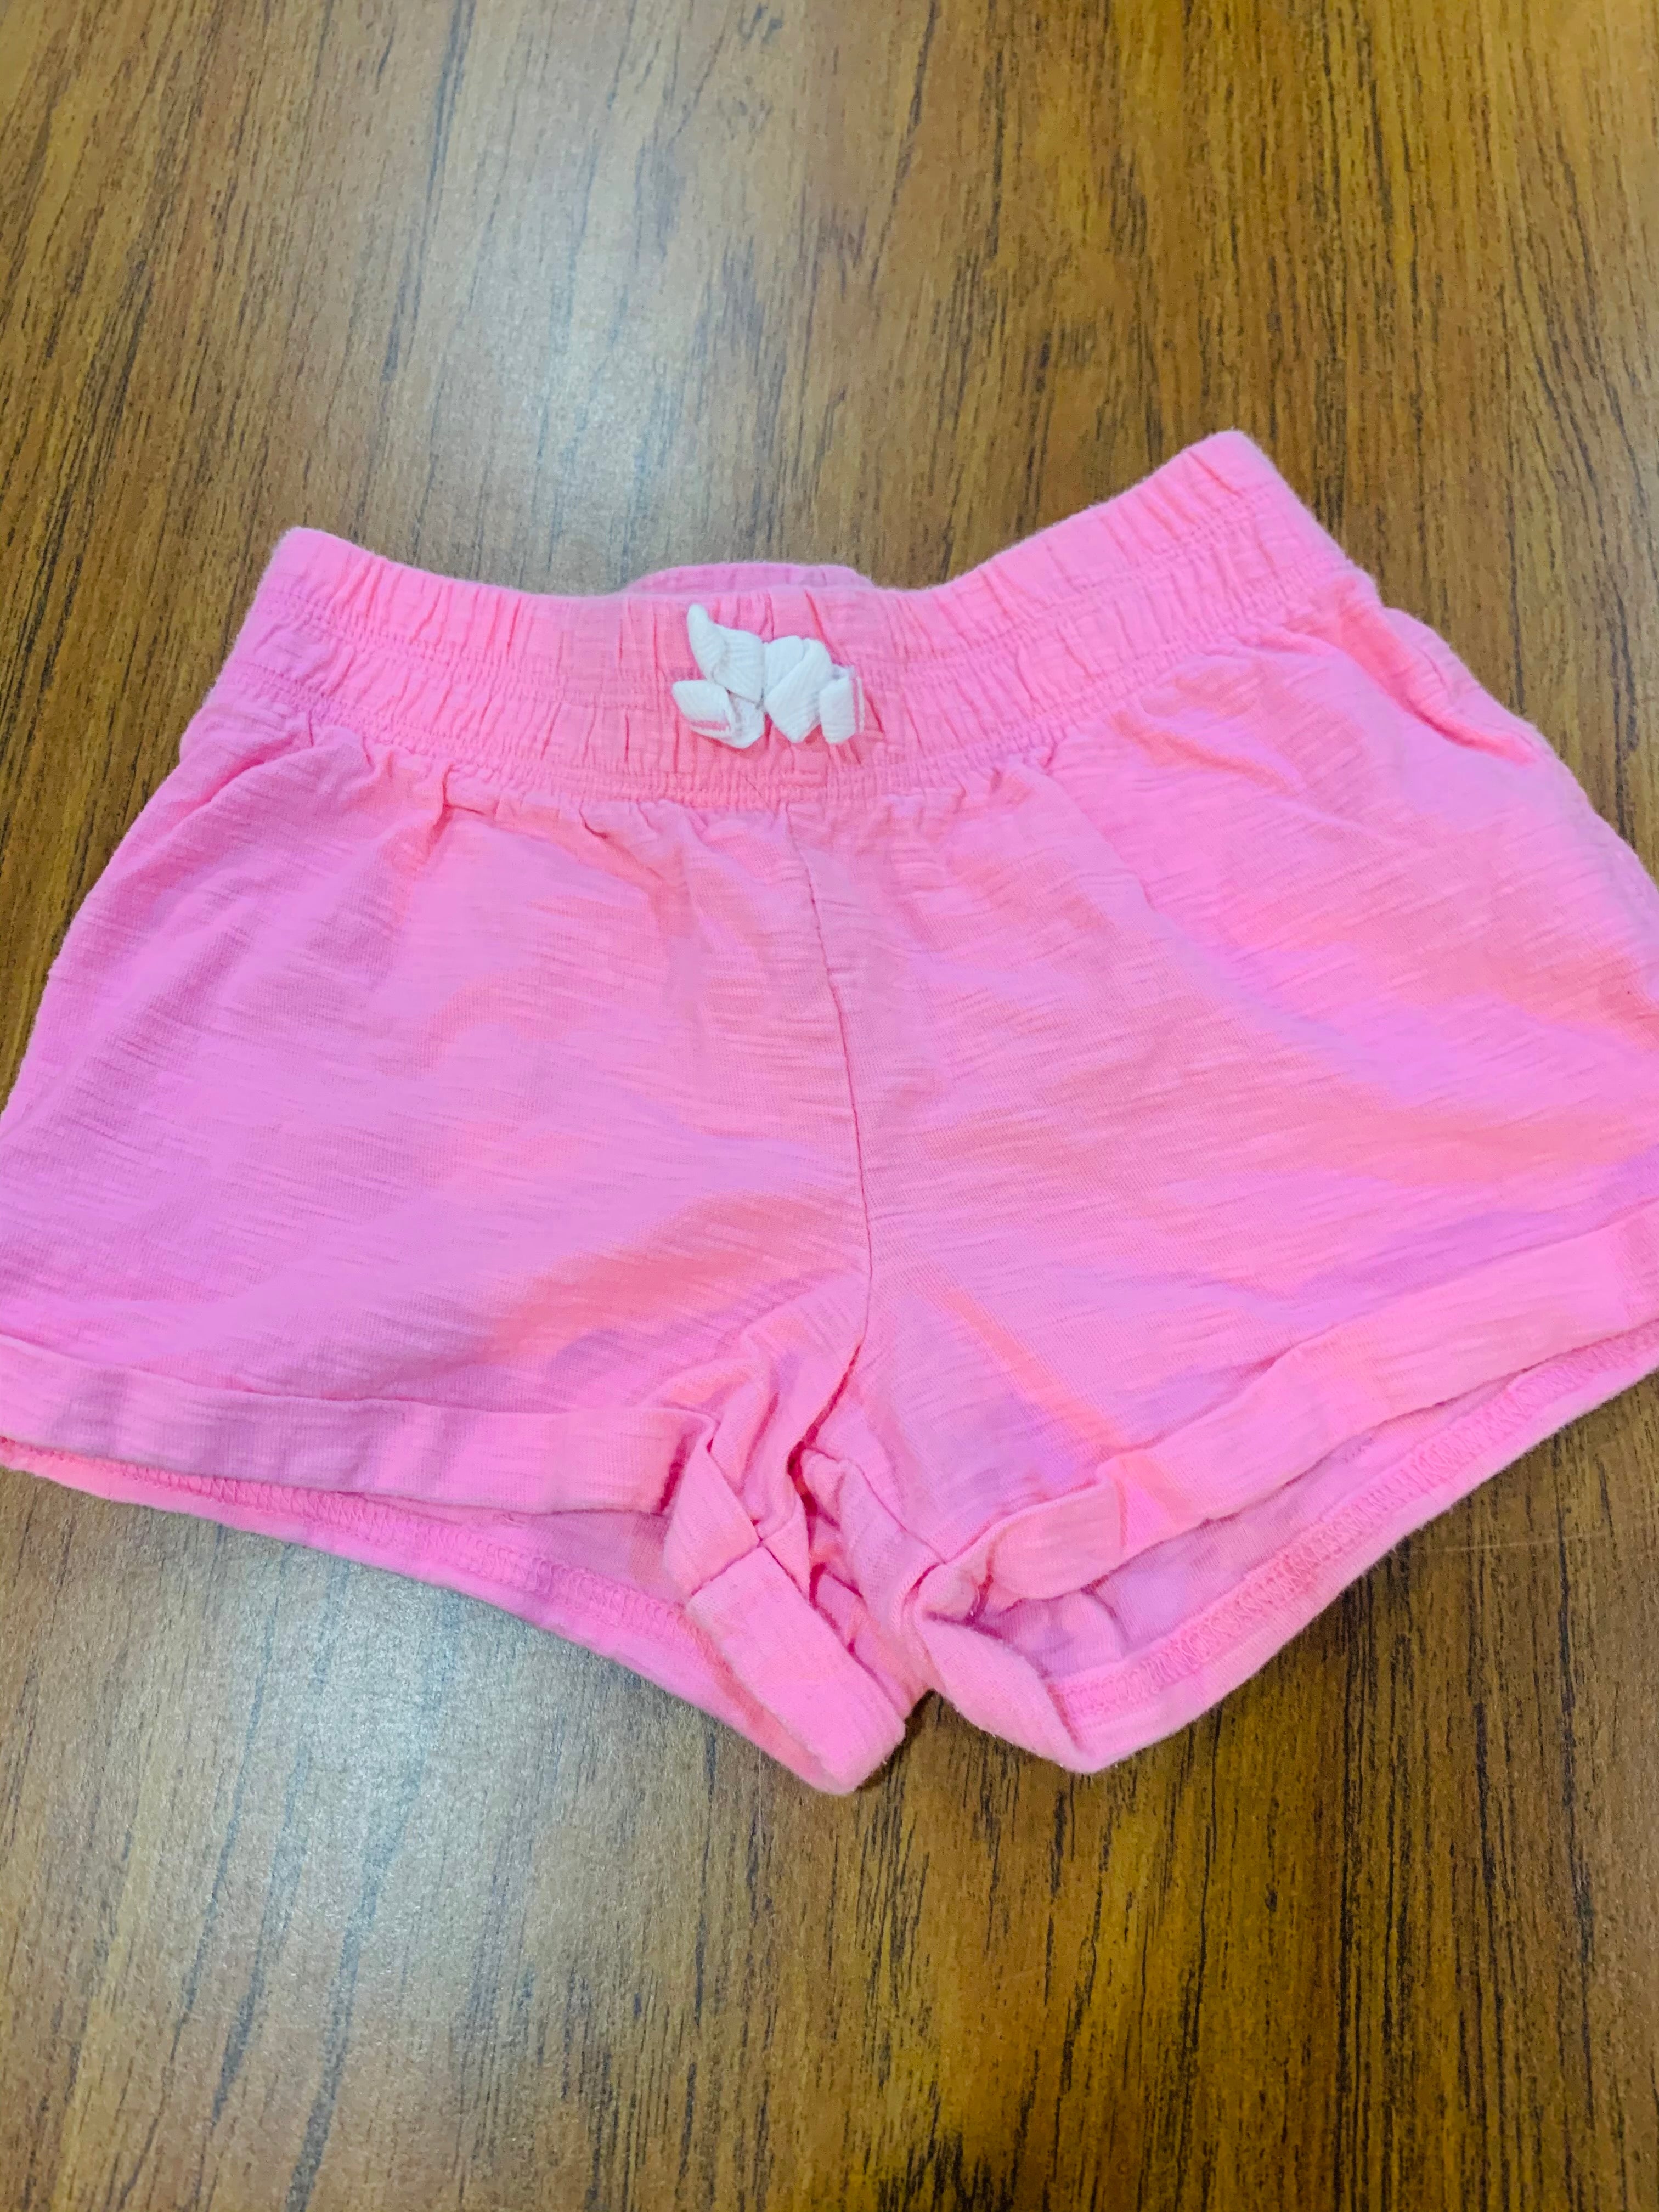 Resale jumping beans pink shorts 7